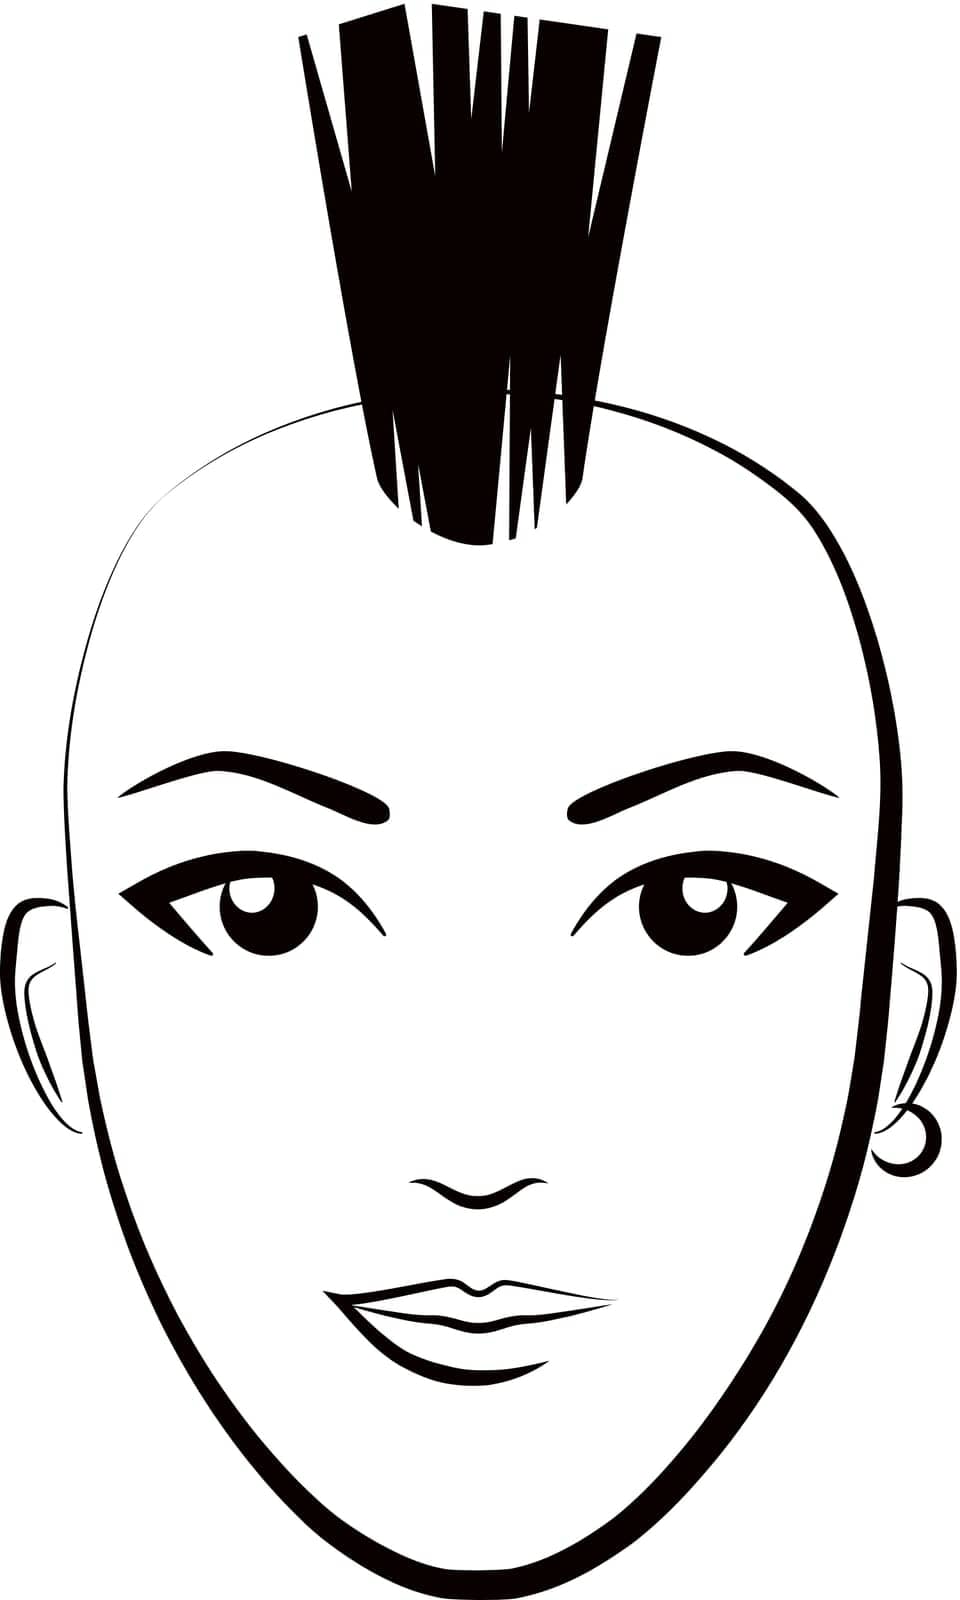 Woman head with punk hairstyle by Lembergvector